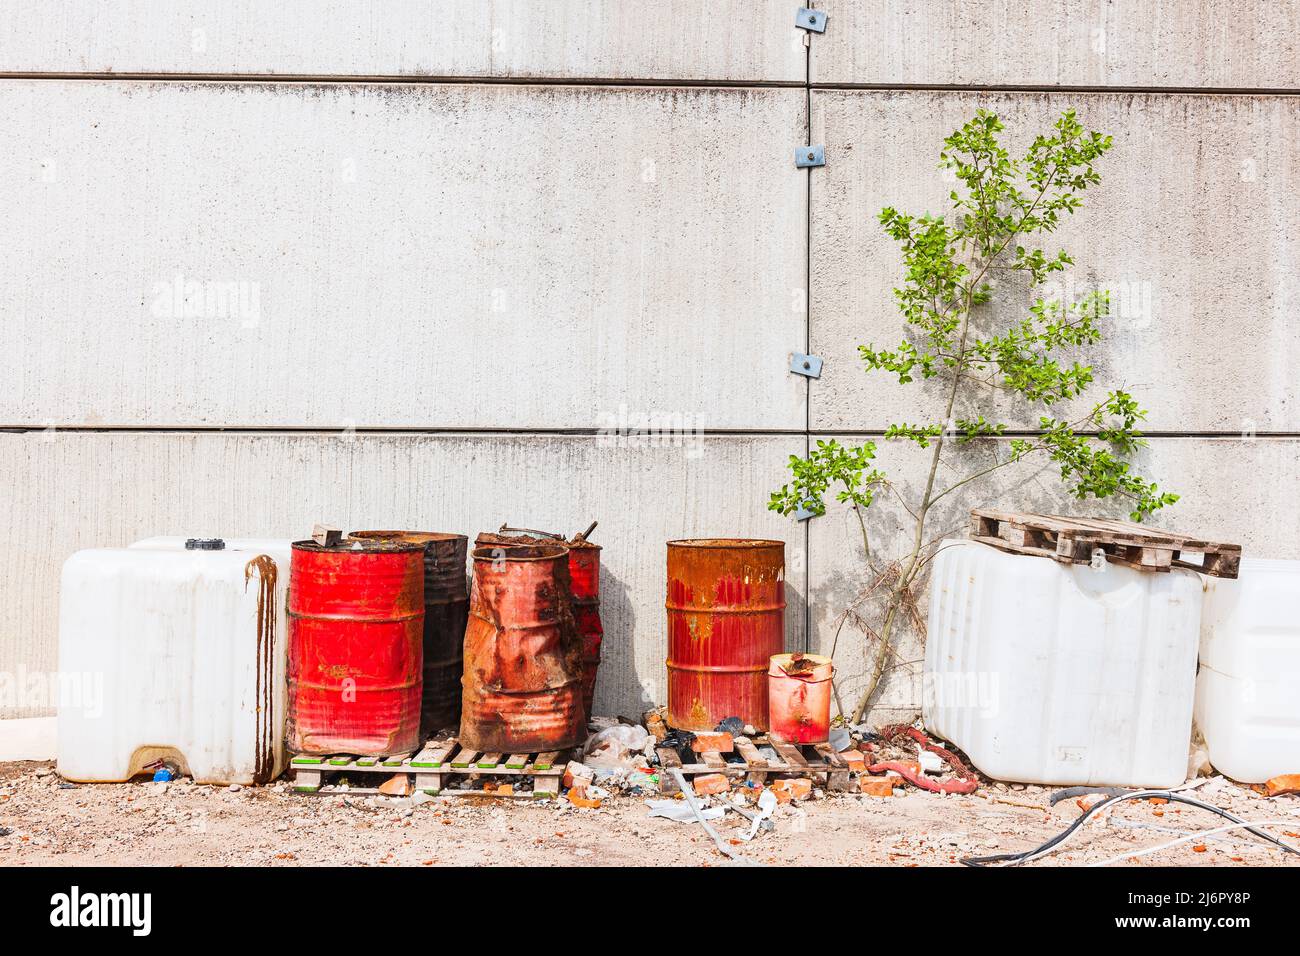 Rusty old barrels outside industry facade Stock Photo